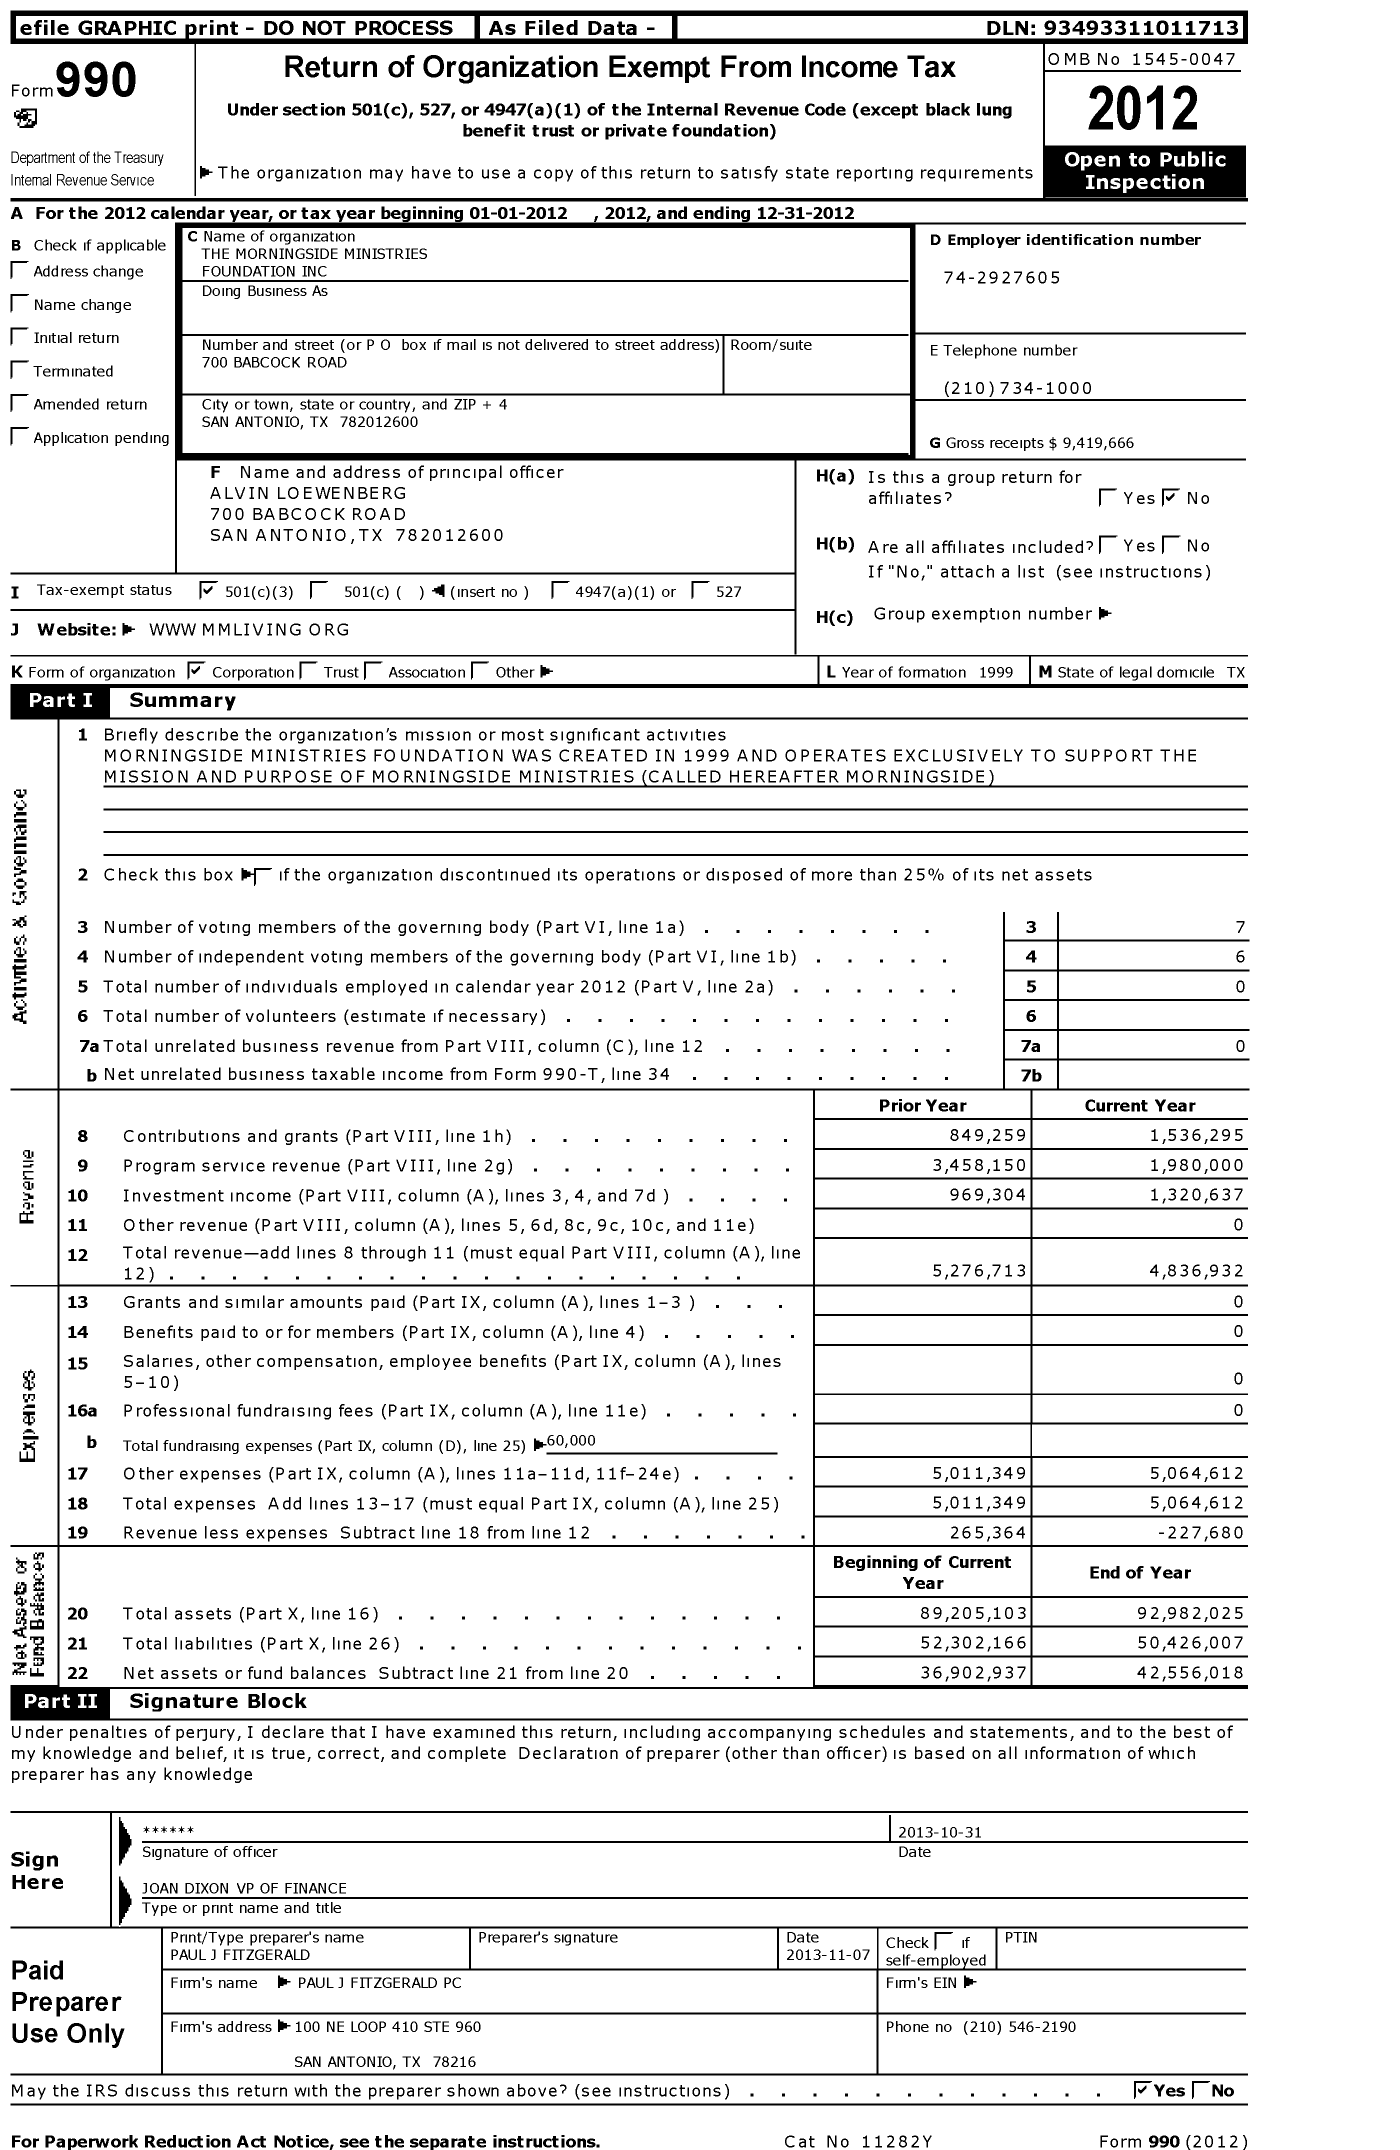 Image of first page of 2012 Form 990 for The Morningside Ministries Foundation